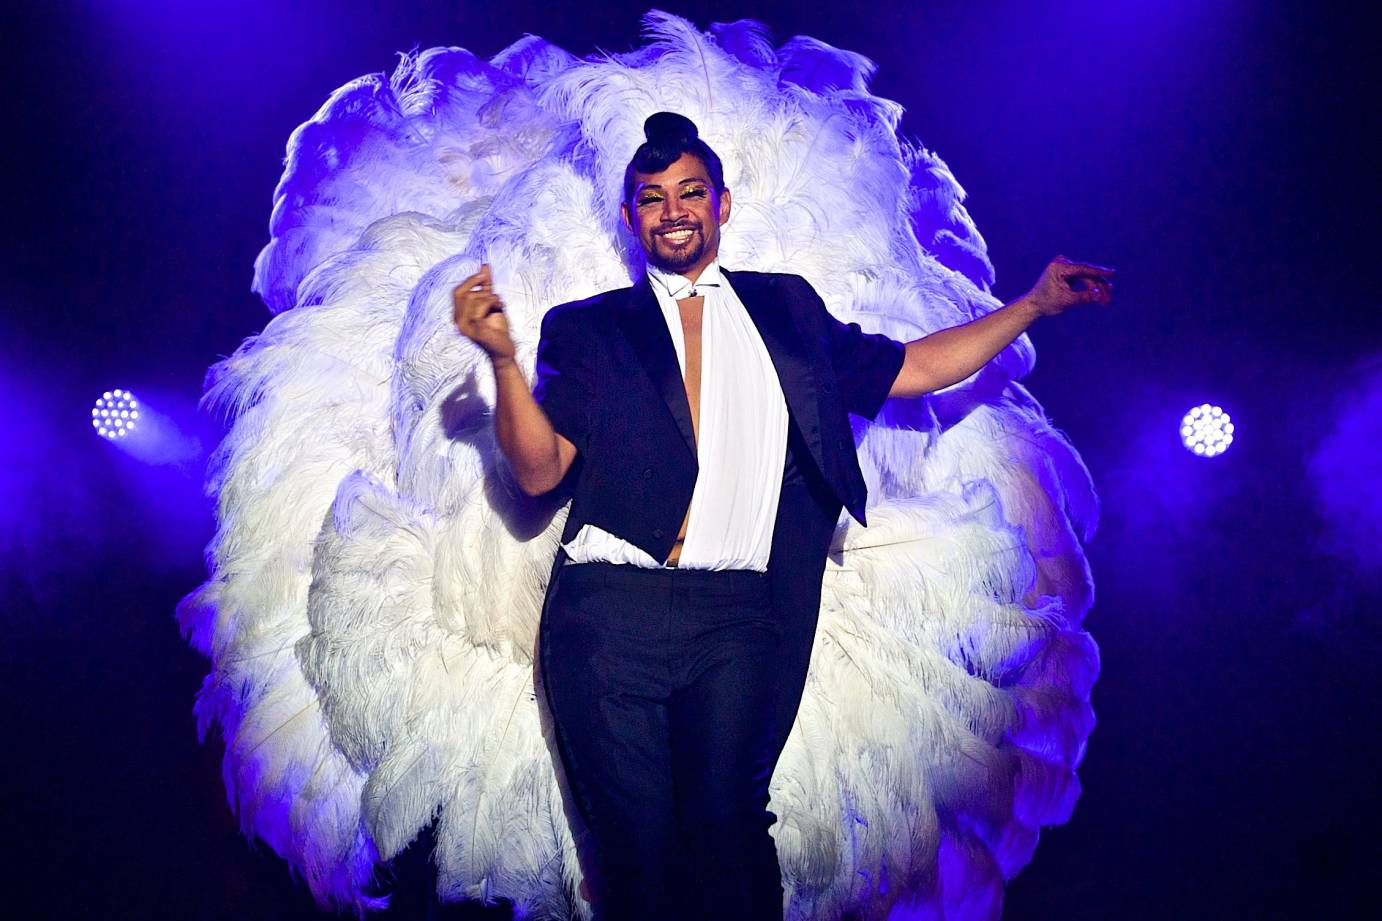 A bearded man in a suit and showgirl feathers